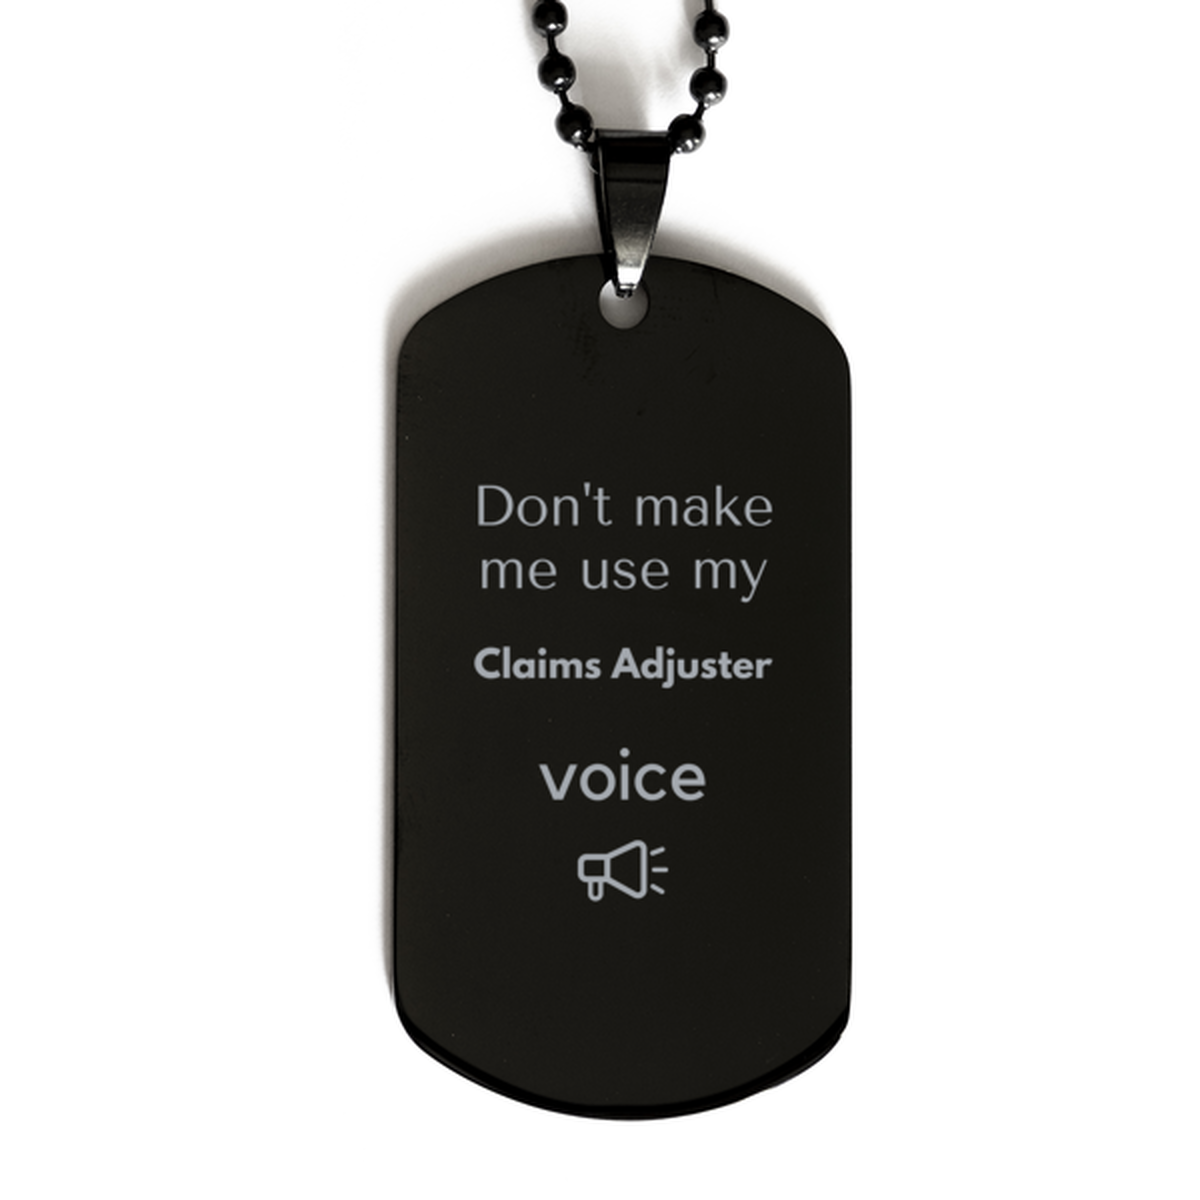 Don't make me use my Claims Adjuster voice, Sarcasm Claims Adjuster Gifts, Christmas Claims Adjuster Black Dog Tag Birthday Unique Gifts For Claims Adjuster Coworkers, Men, Women, Colleague, Friends